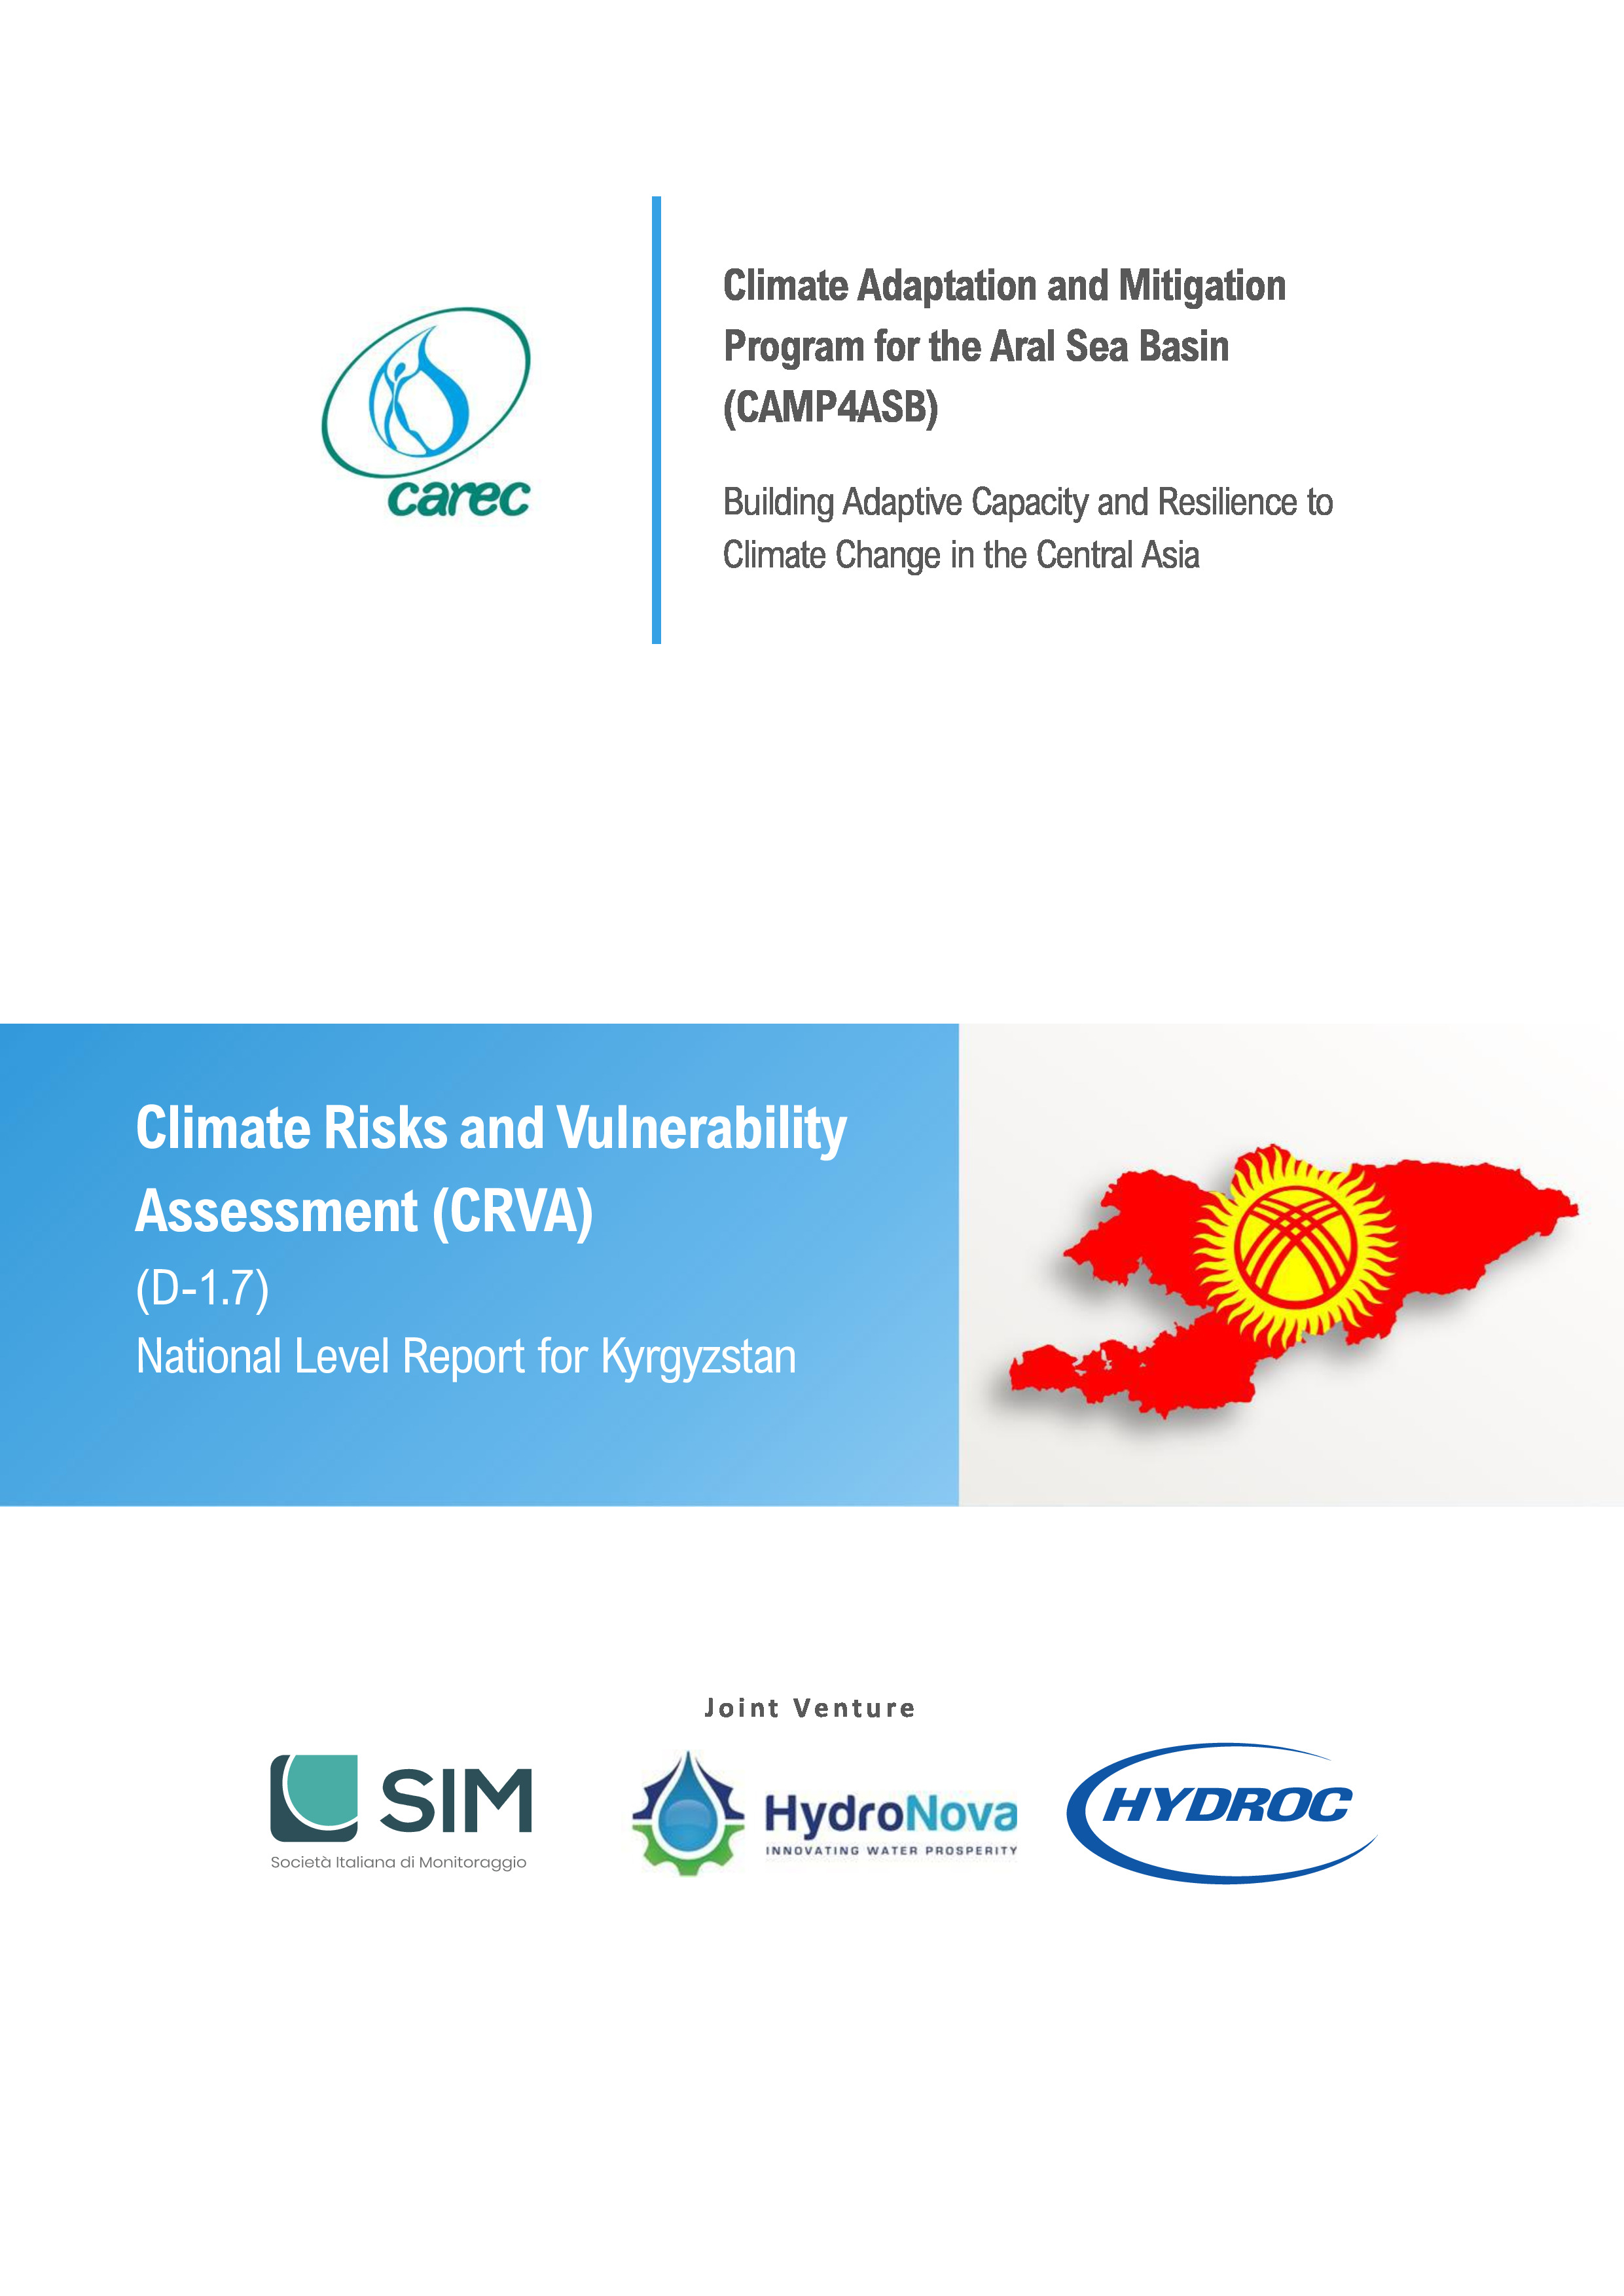 Climate risks and vulnerability assessment (CRVA). National level report for Kyrgyzstan, 2021